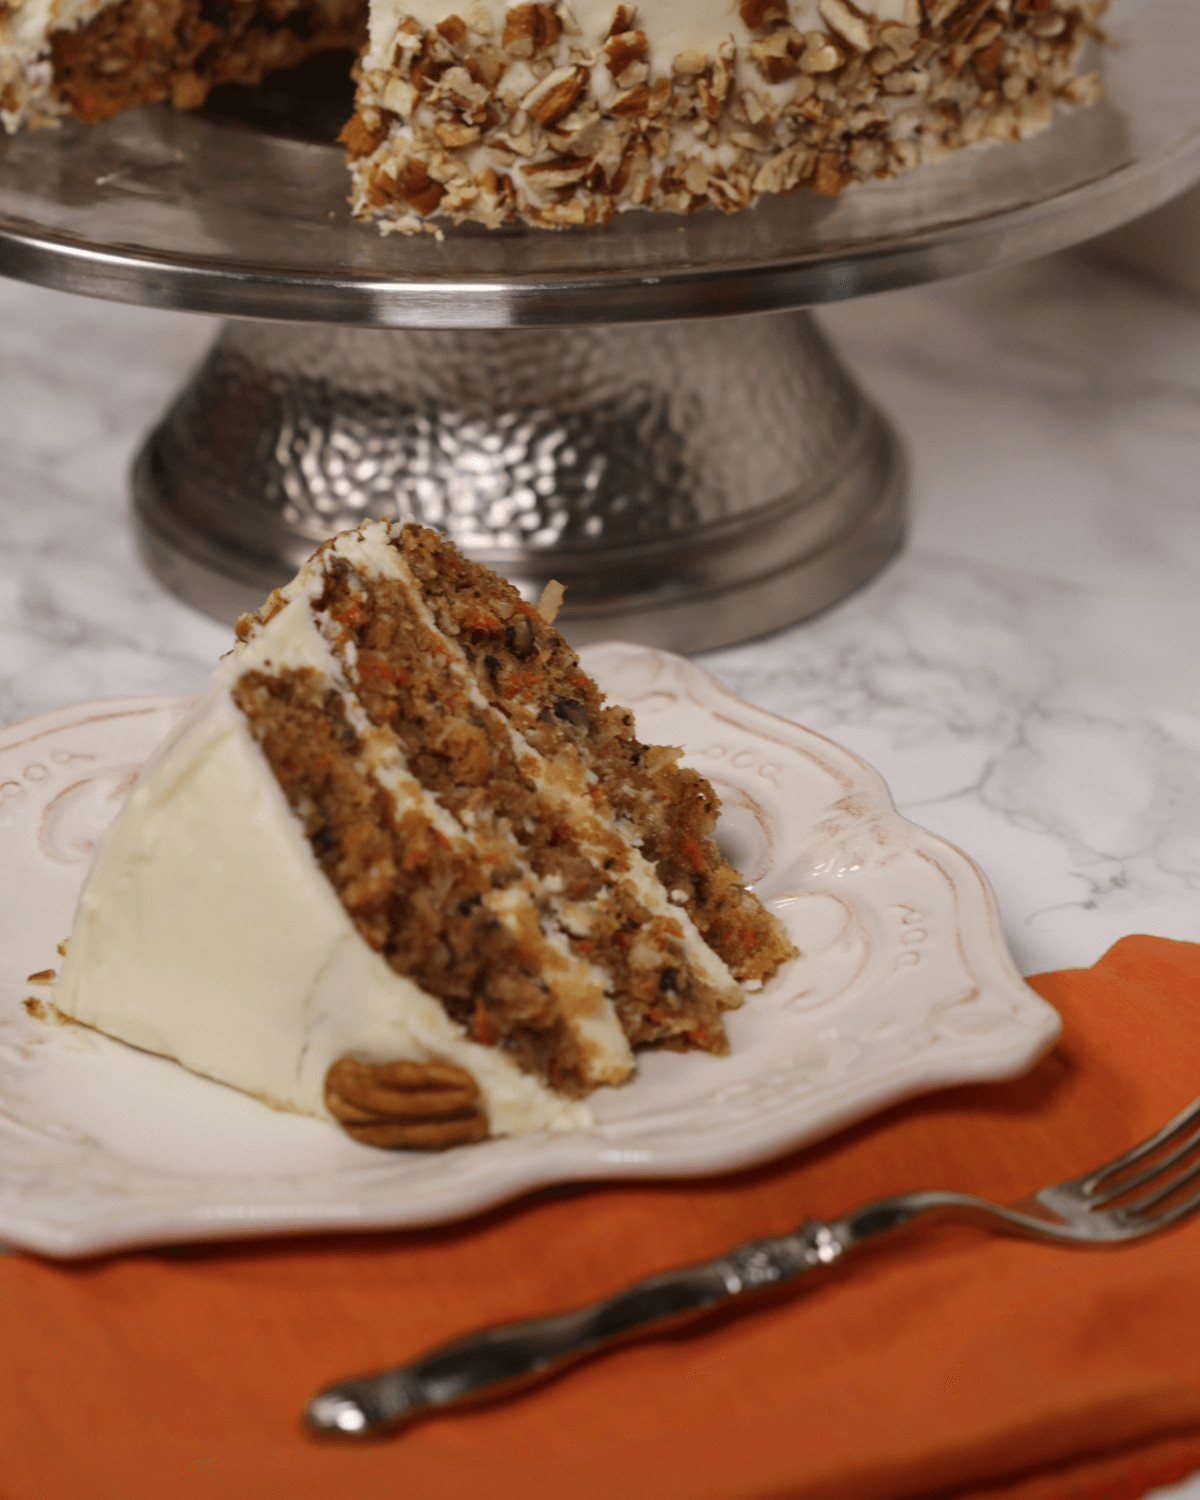 A slice of carrot cake with pineapple, coconut, and cream cheese frosting on a plate, with a cake stand and more cake in the background.